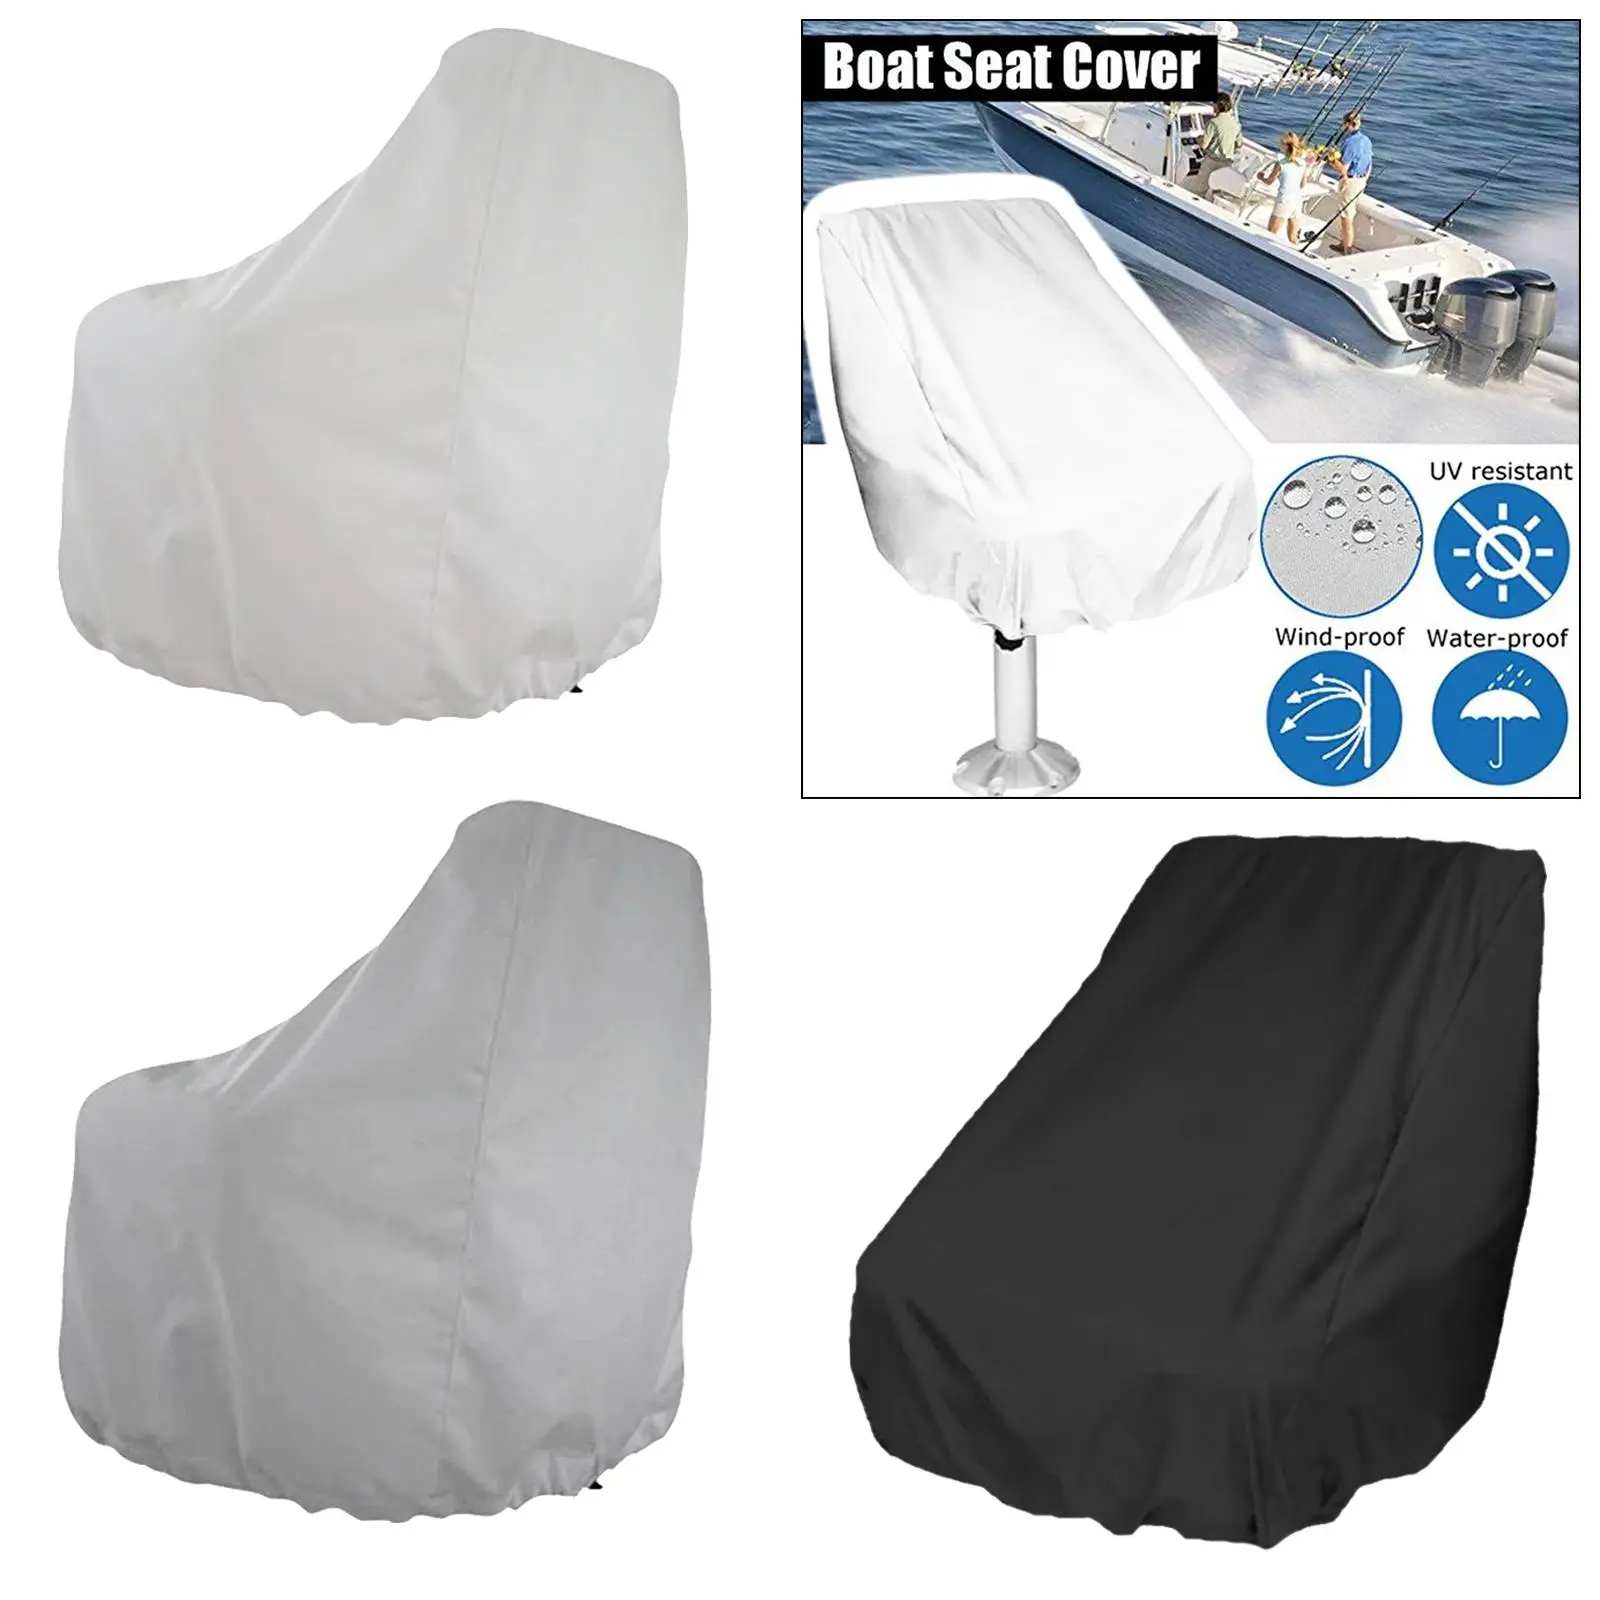 Oxford Fabric Boat Seat Cover, Foldable 210D Boat Seat Cover, Fits Most Pedestal Seats, 56x61x64cm